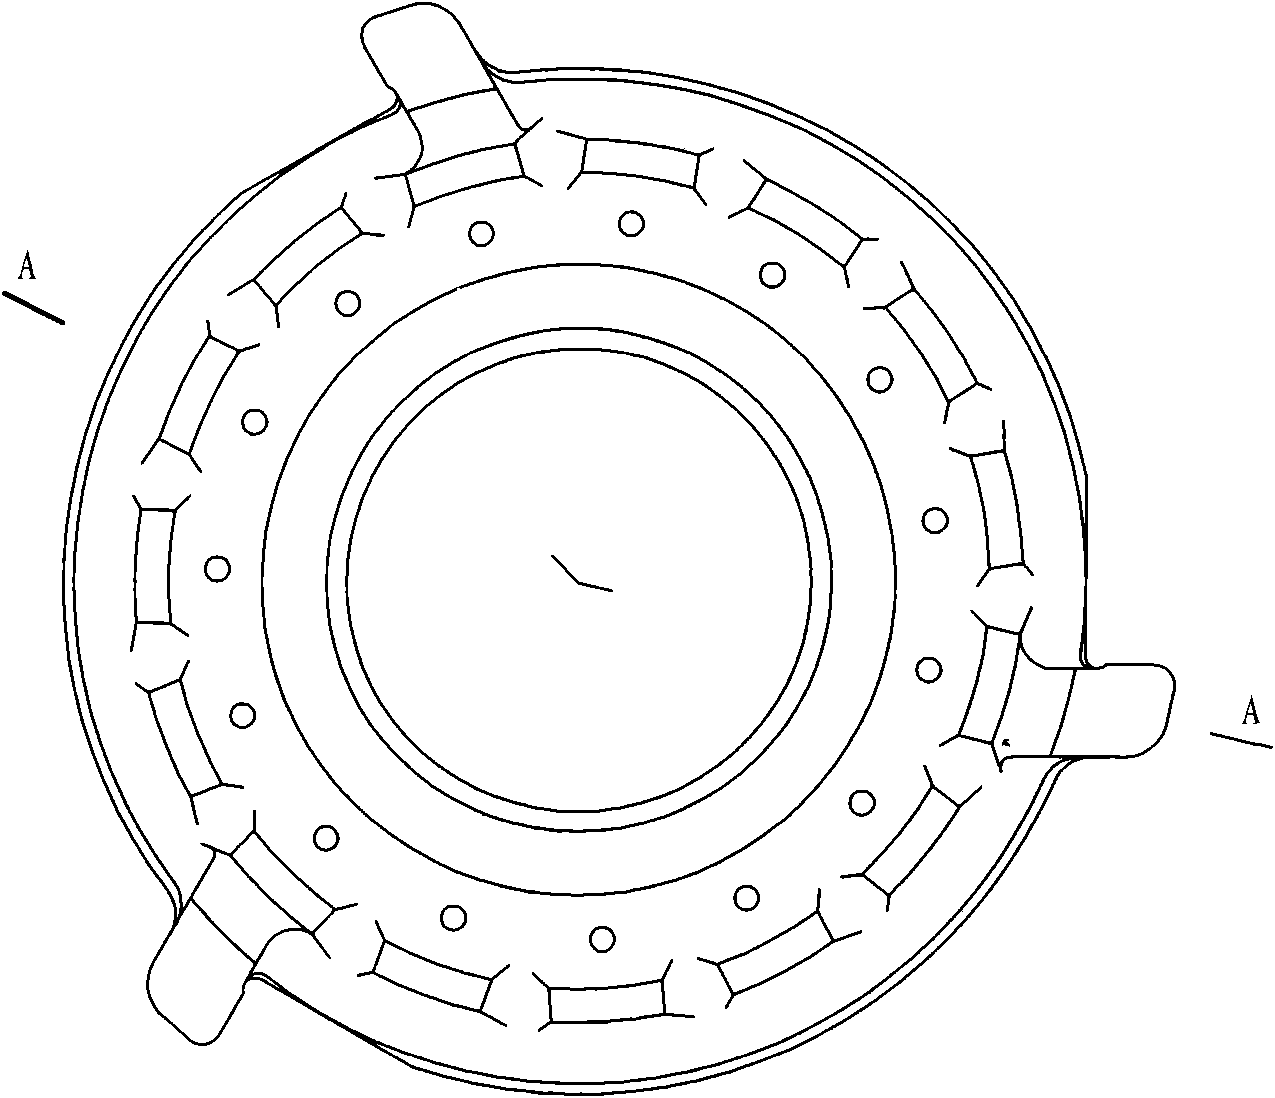 Process for manufacturing saloon car clutch pressure plate casting